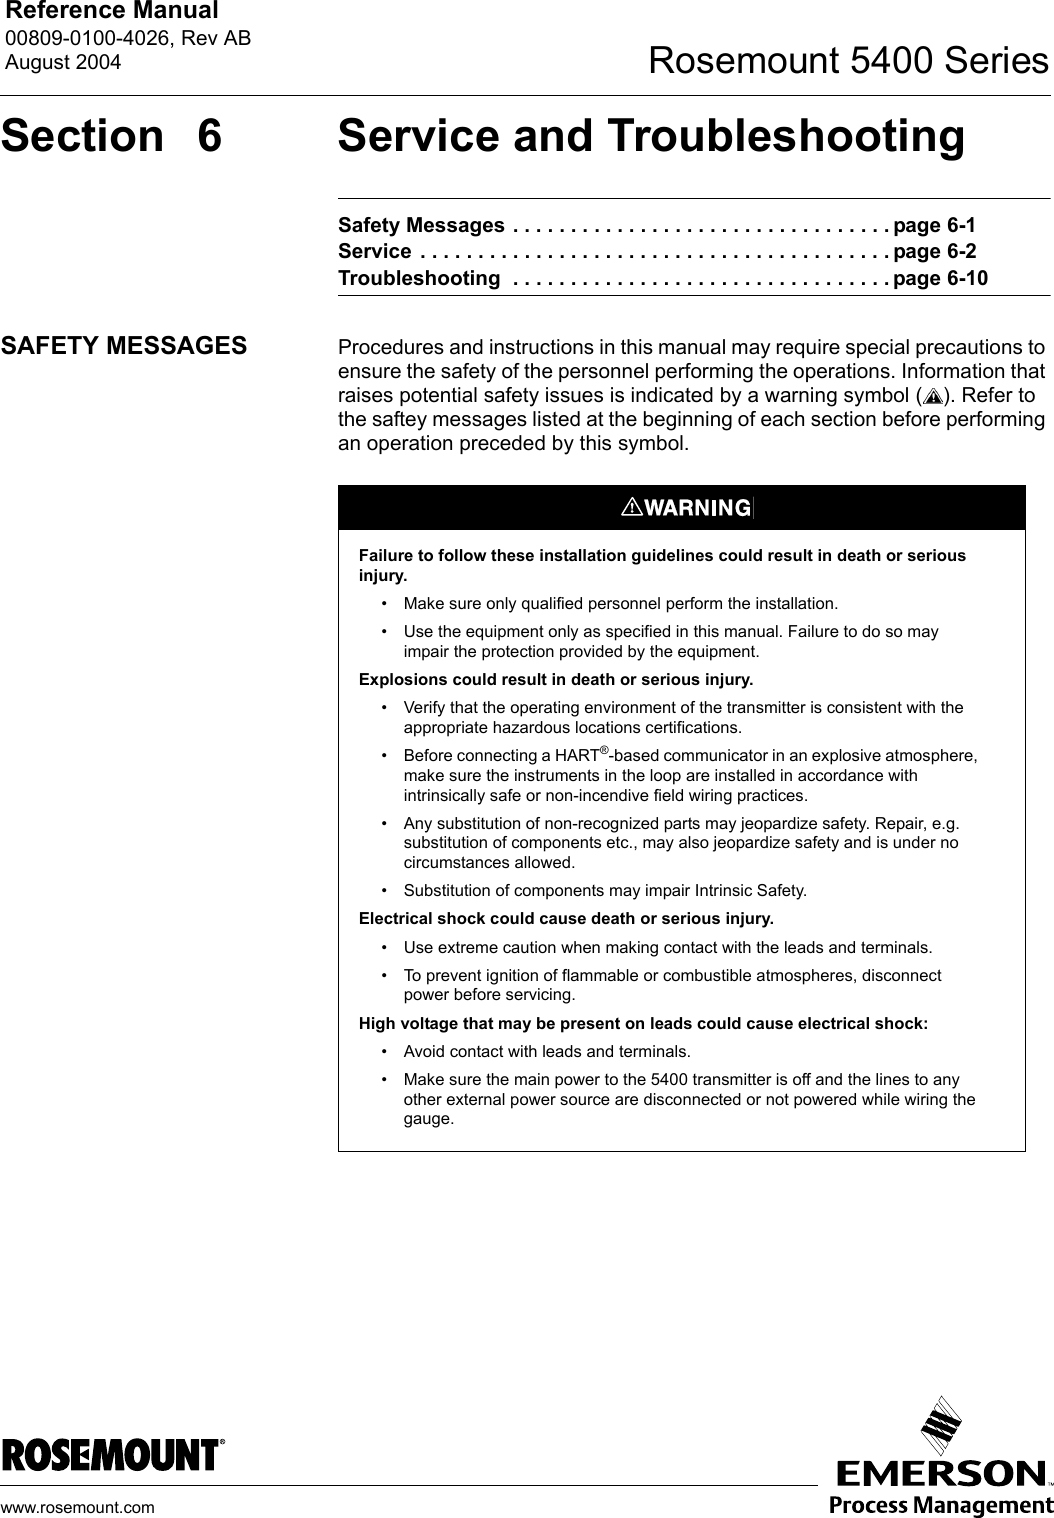 Reference Manual 00809-0100-4026, Rev ABAugust 2004 Rosemount 5400 Serieswww.rosemount.comSection  6 Service and TroubleshootingSafety Messages . . . . . . . . . . . . . . . . . . . . . . . . . . . . . . . . . page 6-1Service  . . . . . . . . . . . . . . . . . . . . . . . . . . . . . . . . . . . . . . . . . page 6-2Troubleshooting  . . . . . . . . . . . . . . . . . . . . . . . . . . . . . . . . . page 6-10SAFETY MESSAGES Procedures and instructions in this manual may require special precautions to ensure the safety of the personnel performing the operations. Information that raises potential safety issues is indicated by a warning symbol ( ). Refer to the saftey messages listed at the beginning of each section before performing an operation preceded by this symbol.Failure to follow these installation guidelines could result in death or serious injury.• Make sure only qualified personnel perform the installation.• Use the equipment only as specified in this manual. Failure to do so may impair the protection provided by the equipment.Explosions could result in death or serious injury.• Verify that the operating environment of the transmitter is consistent with the appropriate hazardous locations certifications.• Before connecting a HART®-based communicator in an explosive atmosphere, make sure the instruments in the loop are installed in accordance with intrinsically safe or non-incendive field wiring practices.• Any substitution of non-recognized parts may jeopardize safety. Repair, e.g. substitution of components etc., may also jeopardize safety and is under no circumstances allowed.• Substitution of components may impair Intrinsic Safety.Electrical shock could cause death or serious injury.• Use extreme caution when making contact with the leads and terminals.• To prevent ignition of flammable or combustible atmospheres, disconnect power before servicing.High voltage that may be present on leads could cause electrical shock:• Avoid contact with leads and terminals. • Make sure the main power to the 5400 transmitter is off and the lines to any other external power source are disconnected or not powered while wiring the gauge.